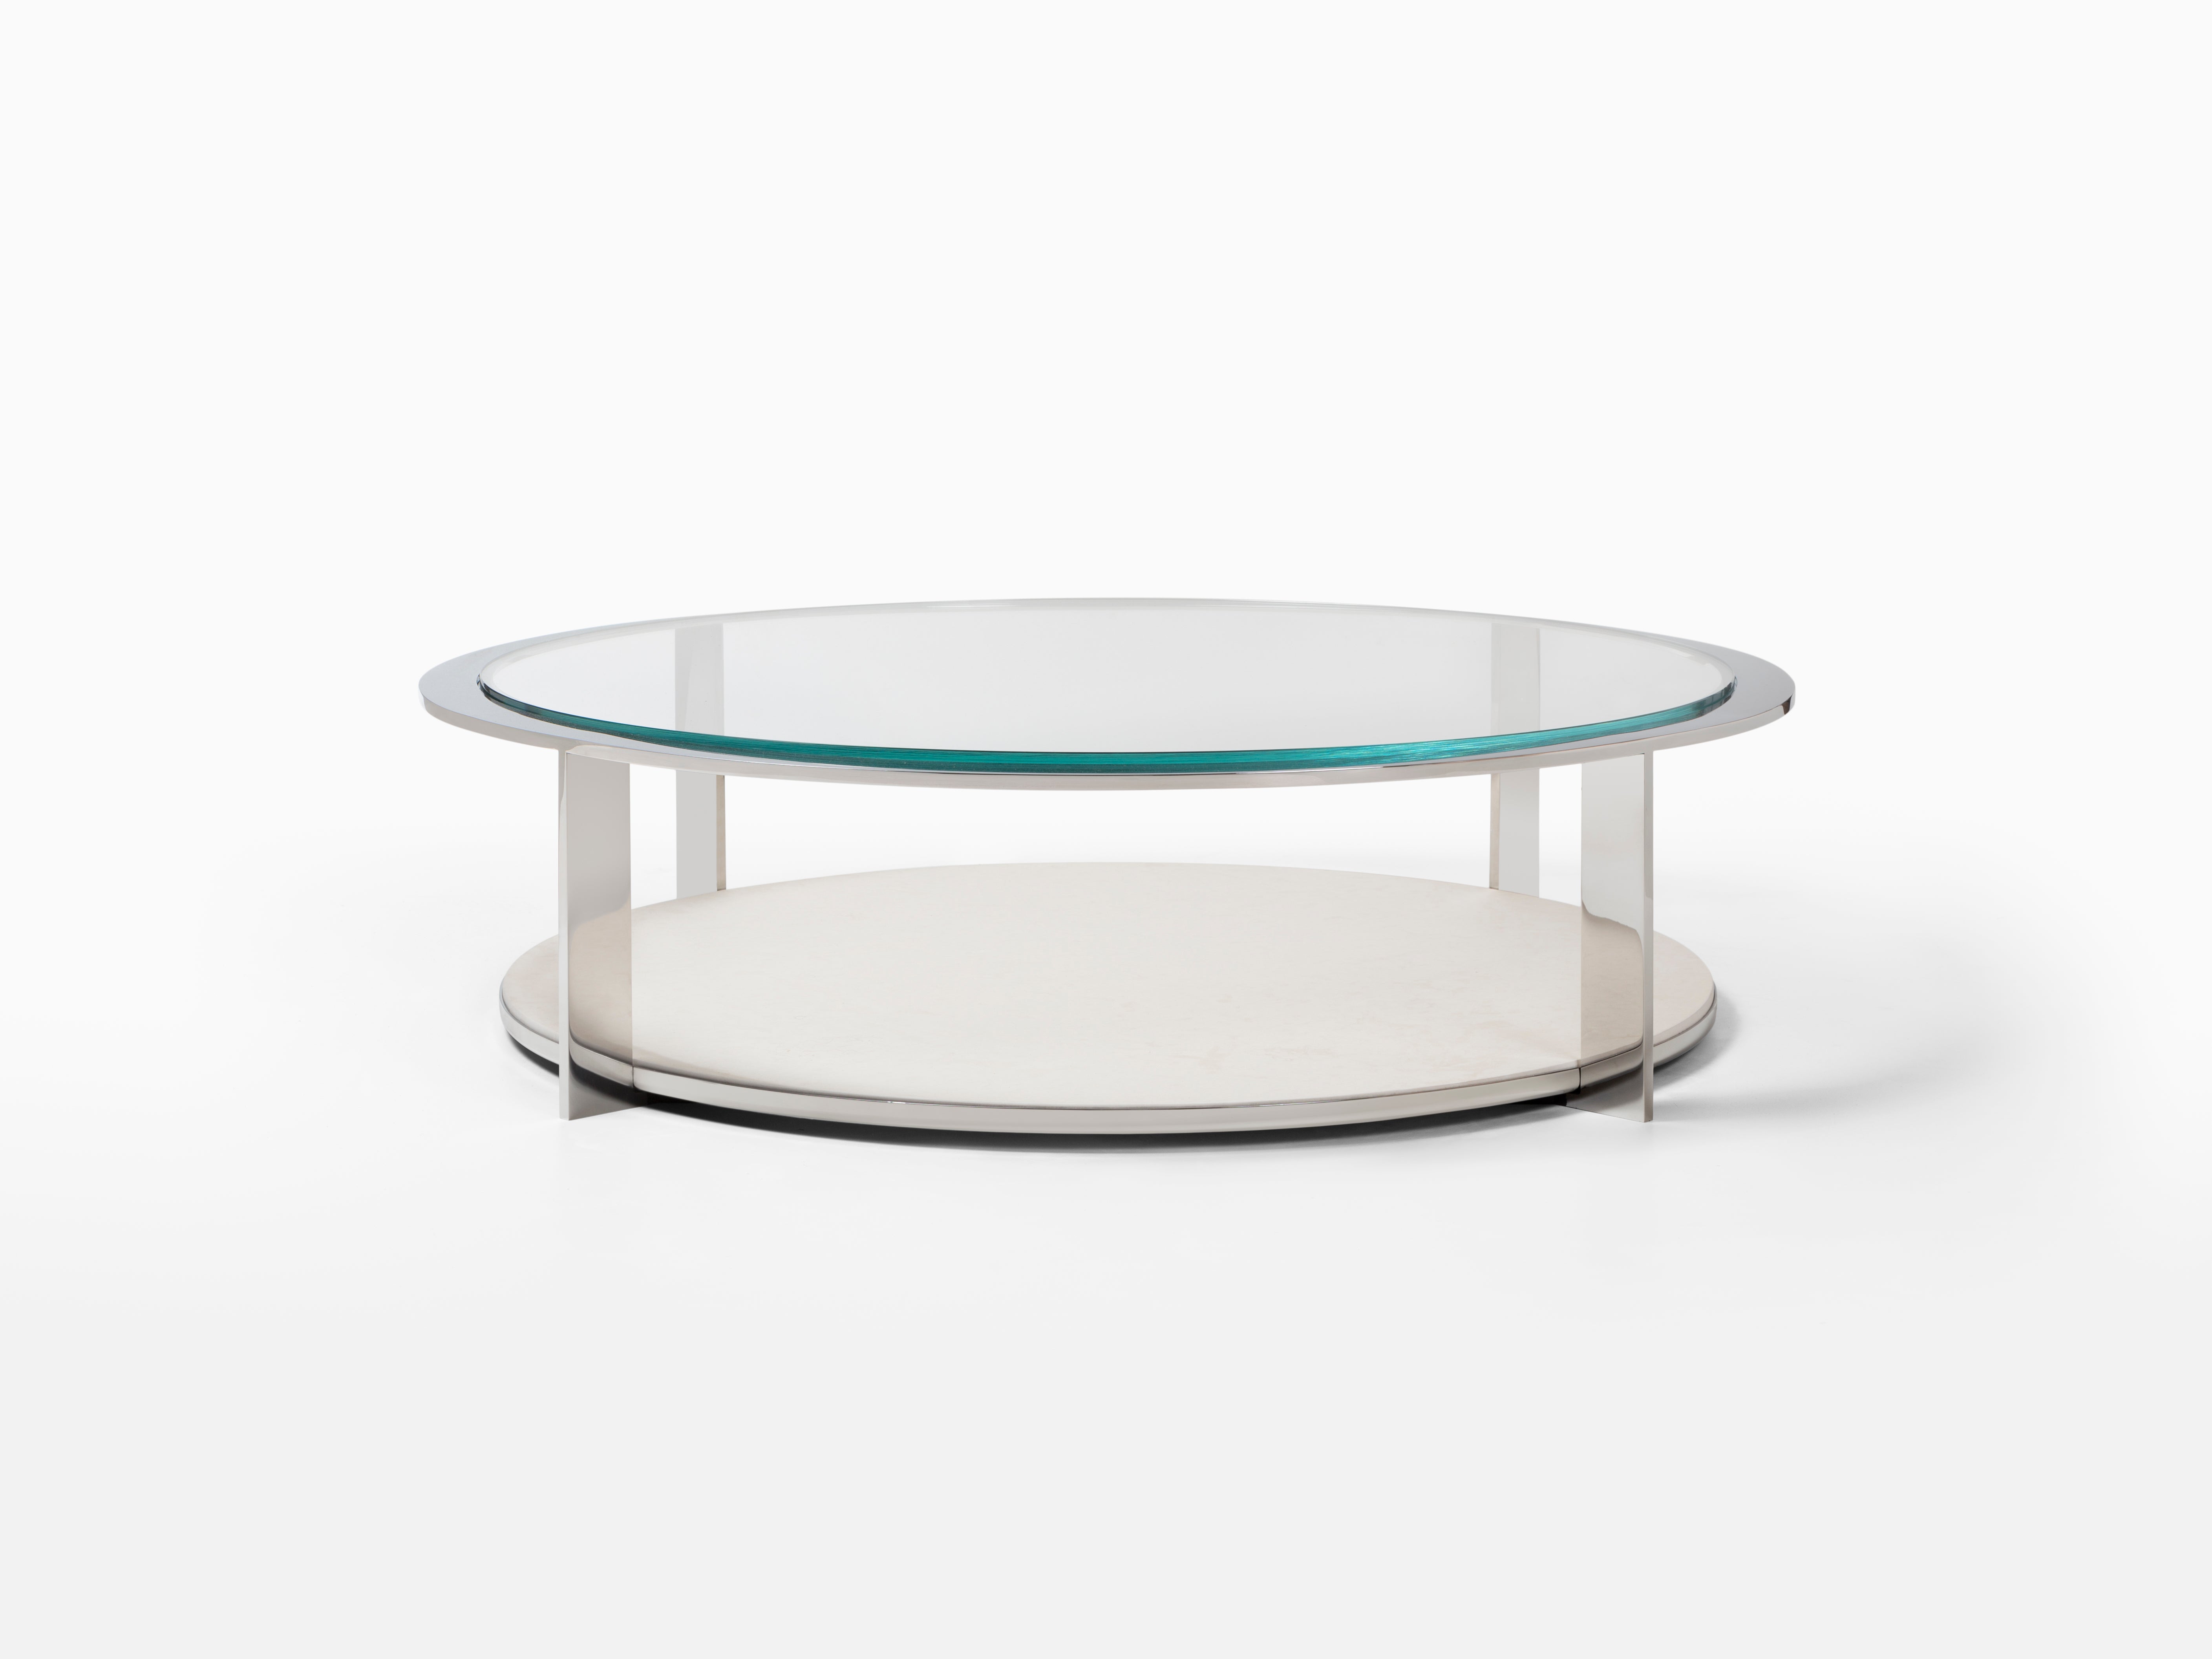 Metal, stone and glass materials are elegantly featured in the Ion Cocktail Table. The round shape and bold materials serve as the perfect focal point to enhance any style of room while providing the perfect display space for your treasured finds.